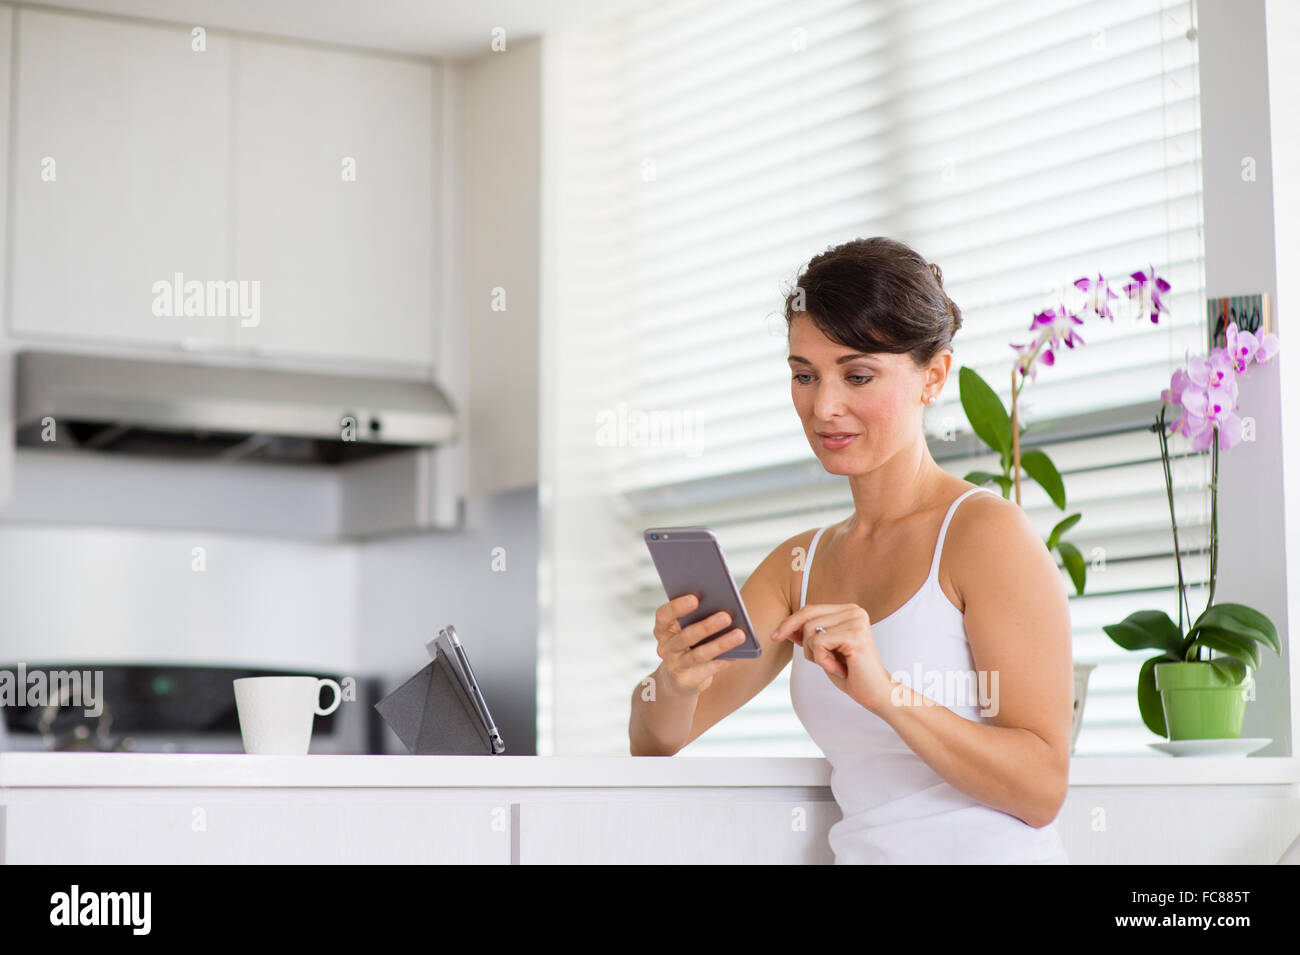 Caucasian woman using cell phone in kitchen Stock Photo